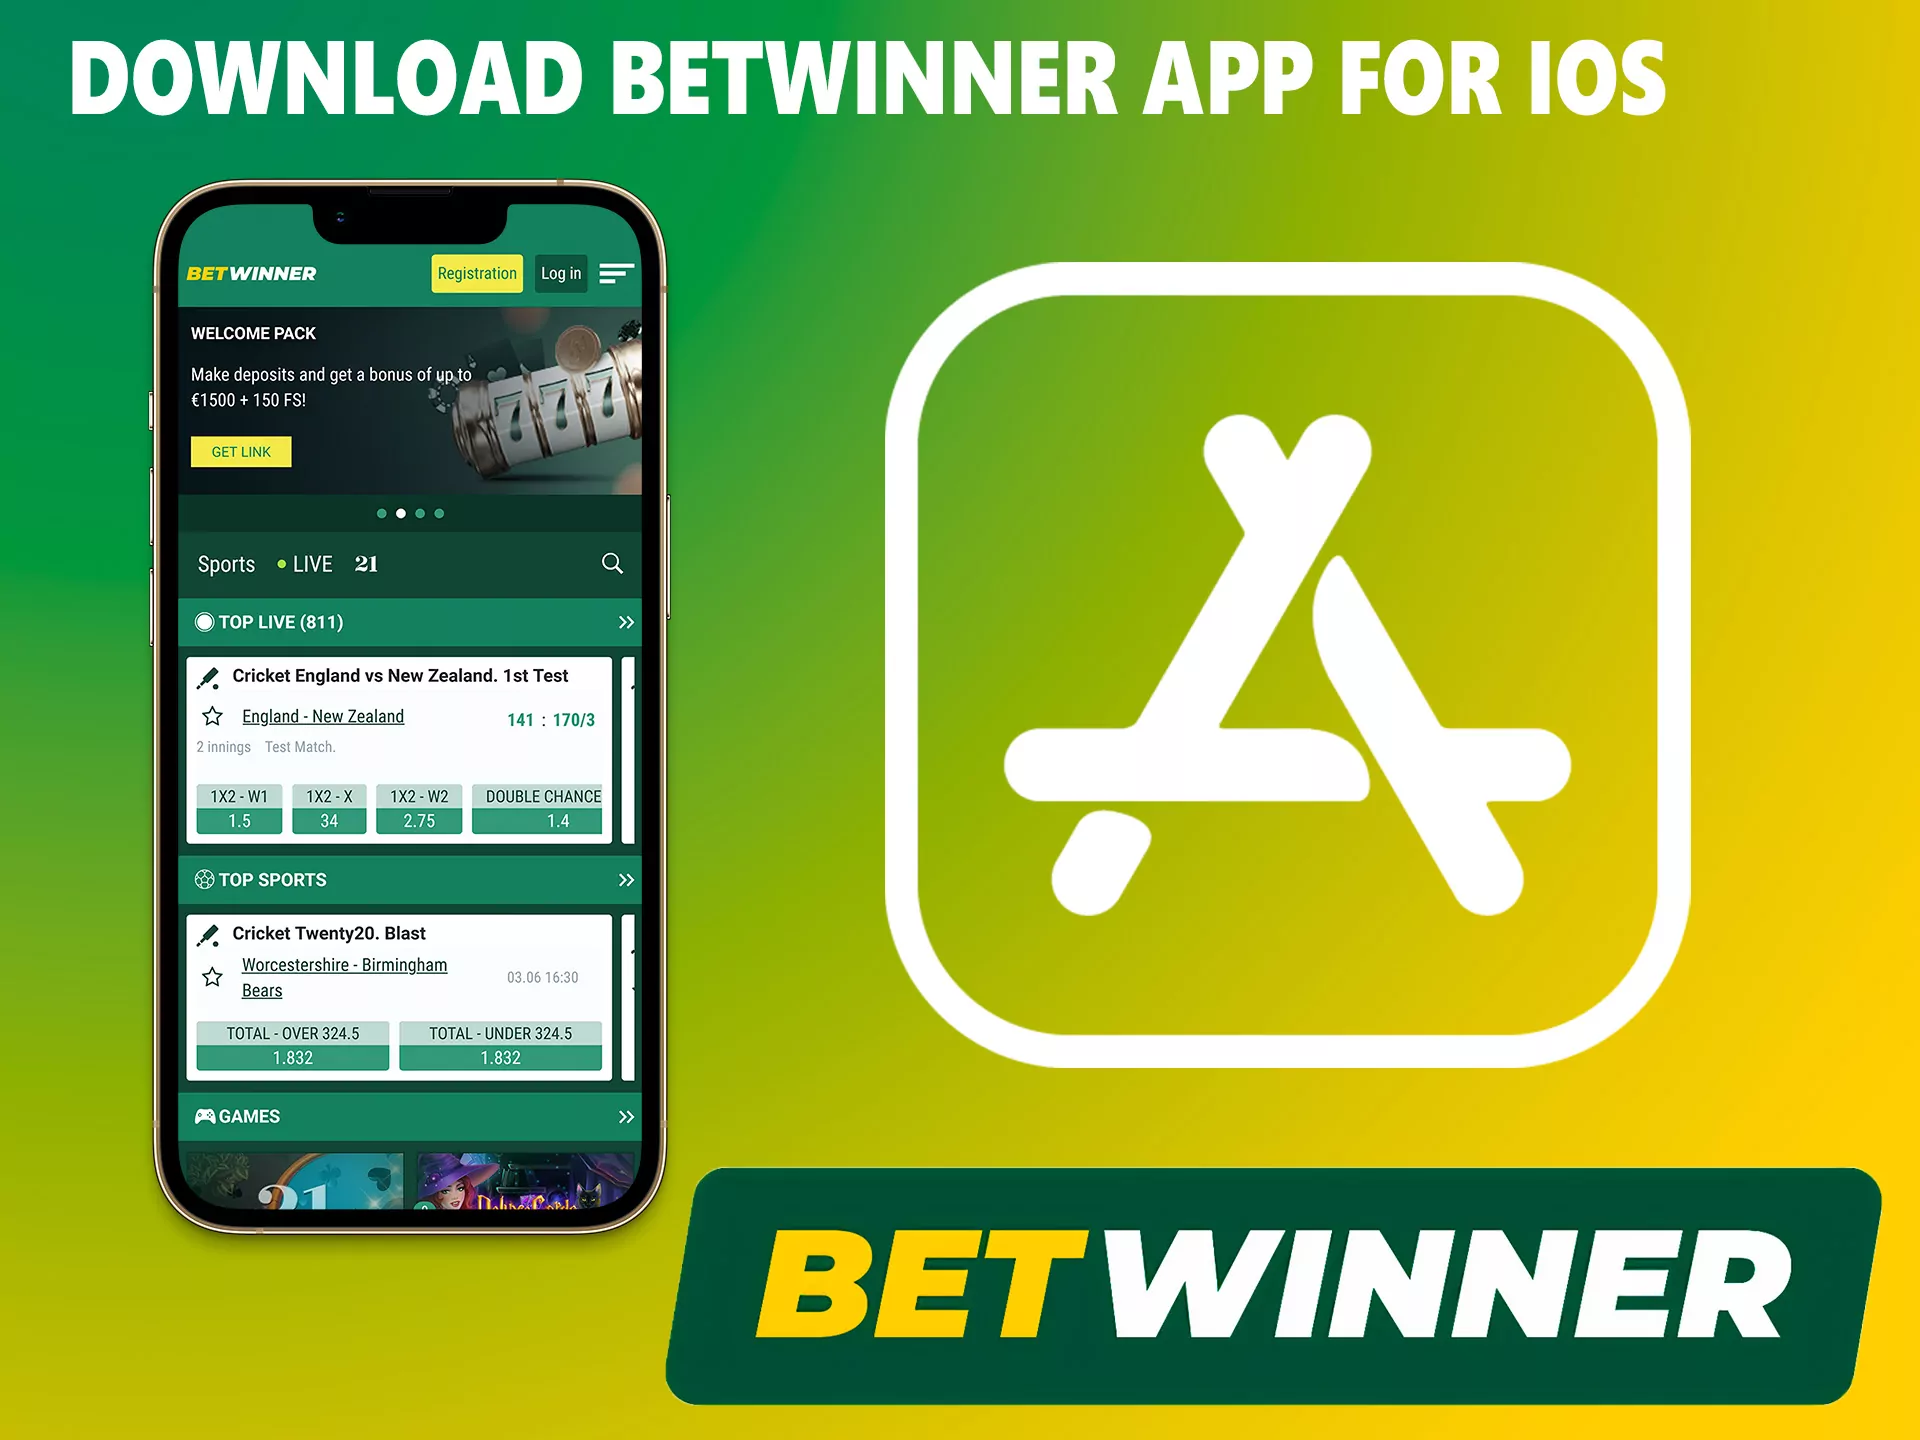 The Betwinner app can be found in the App Store, open the store and follow the instructions.